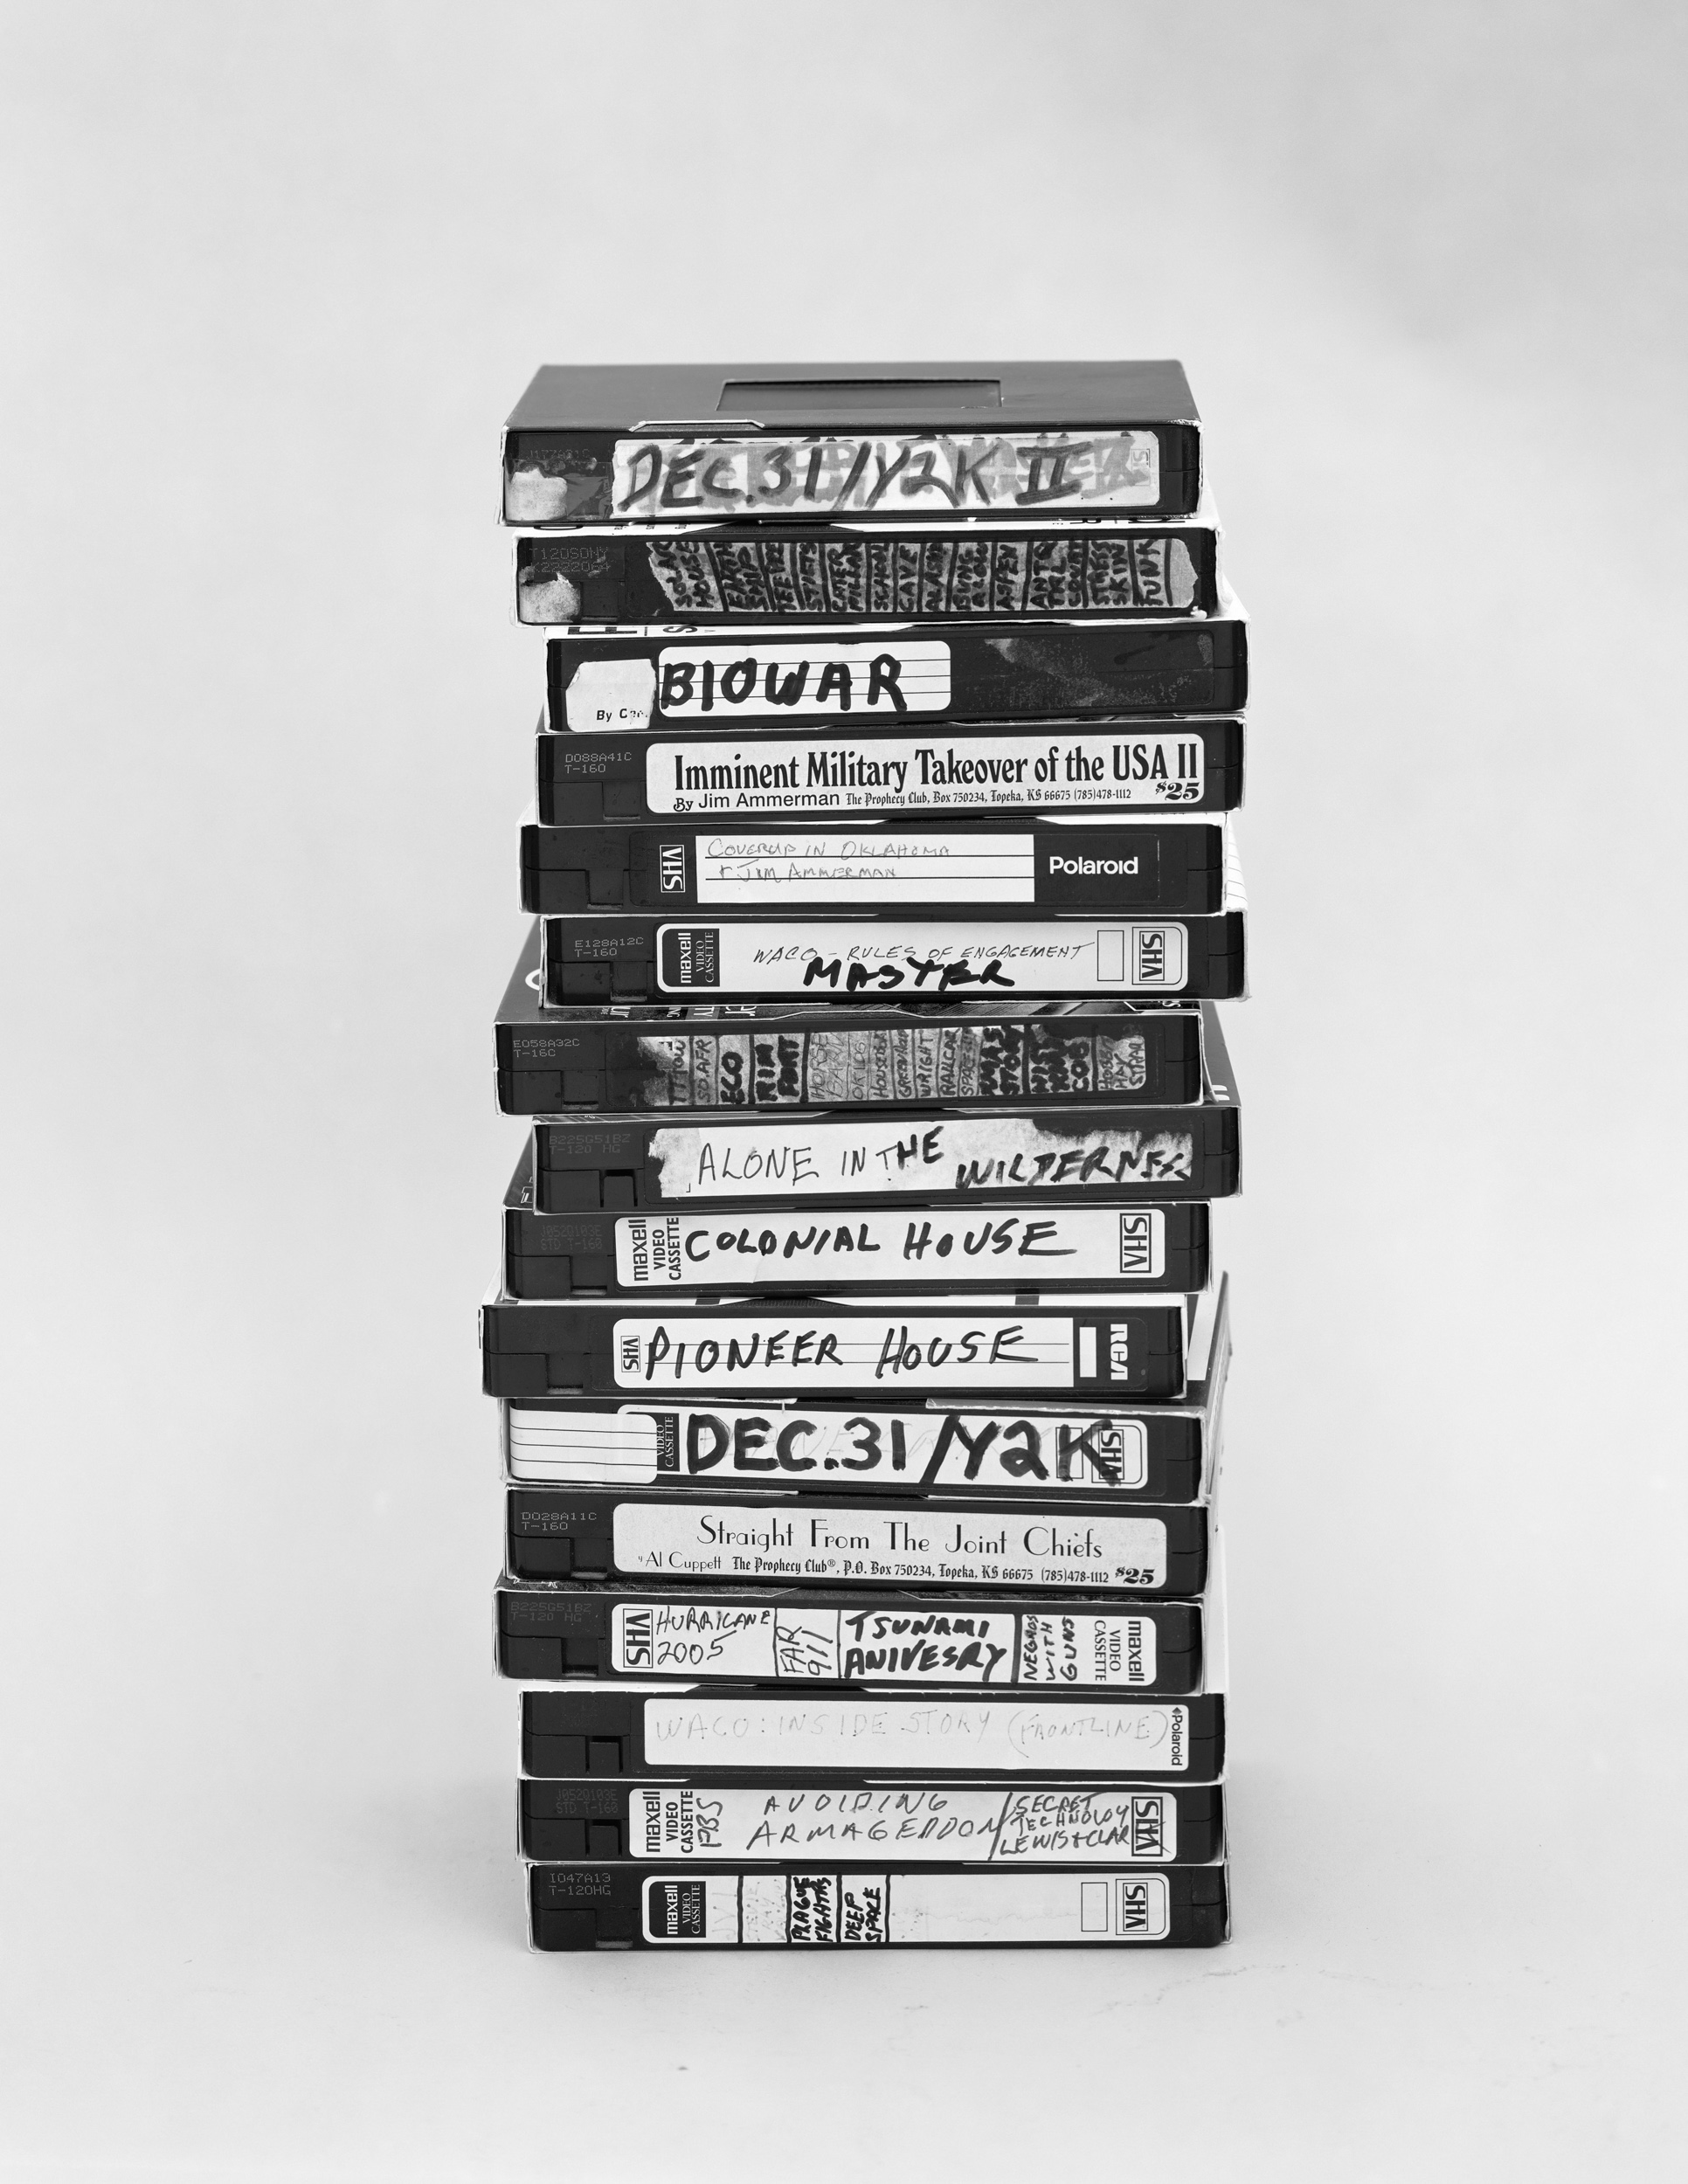 Black and white photograph of a stack of VHS tapes each labeled in handwriting